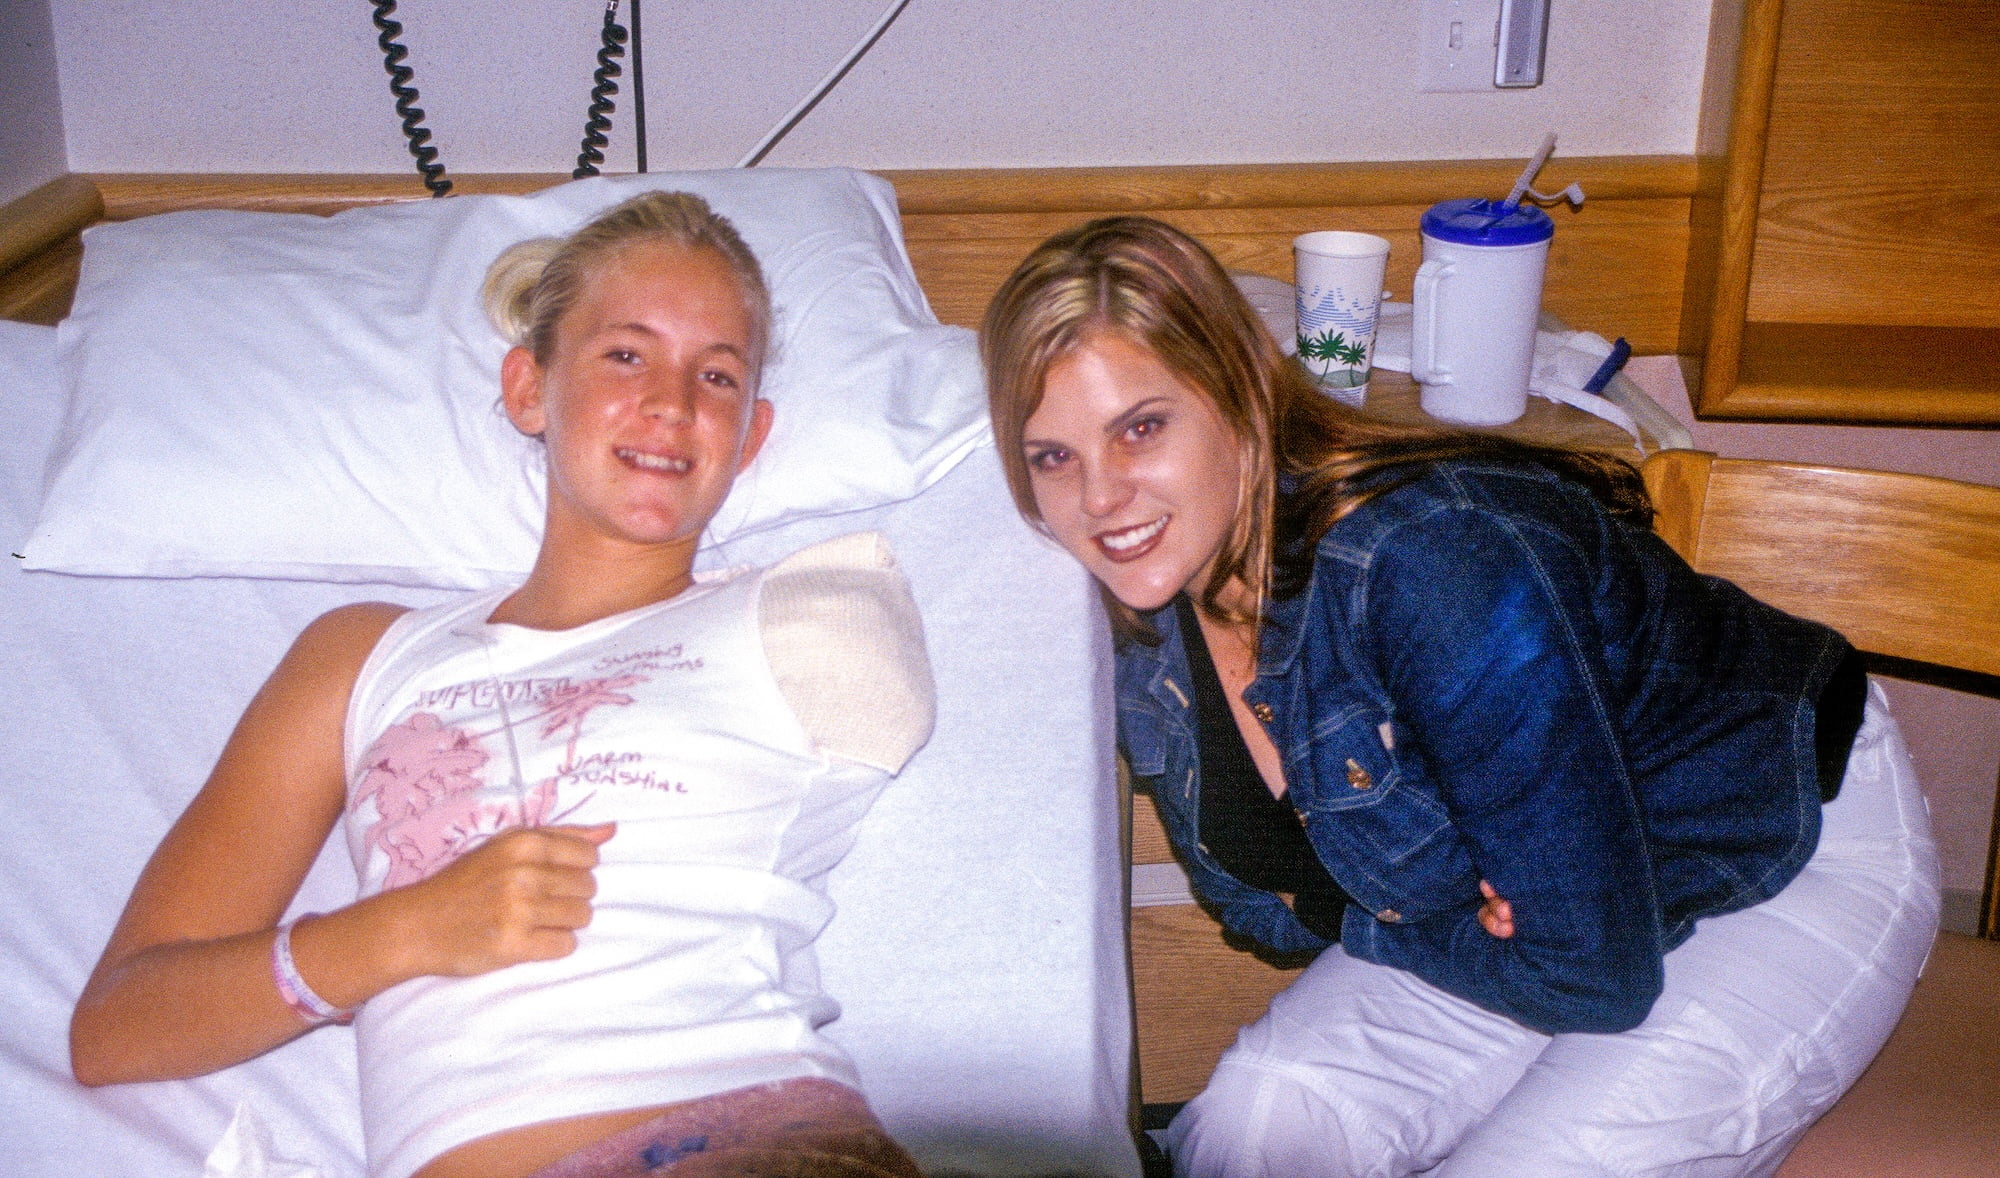 Bethany Hamilton and Sarah Hill, Beautifully Flawed Foundation Executive Director, in the hospital back in 2003 right after Bethany lost her arm in the shark attack.